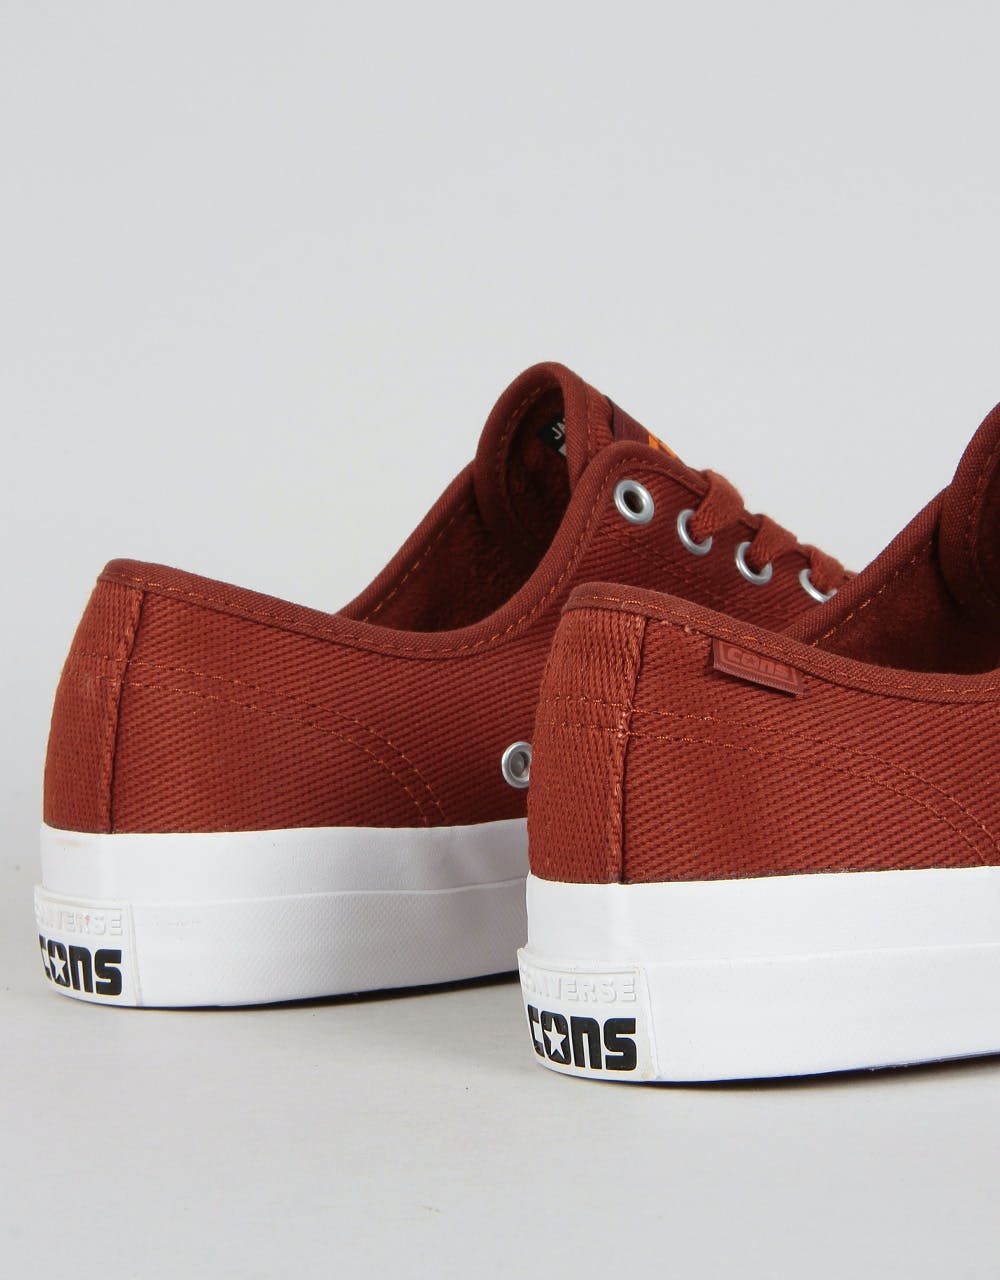 Converse Jack Purcell Pro Ox Skate Shoes - Cinnamon/White/Orange Rind